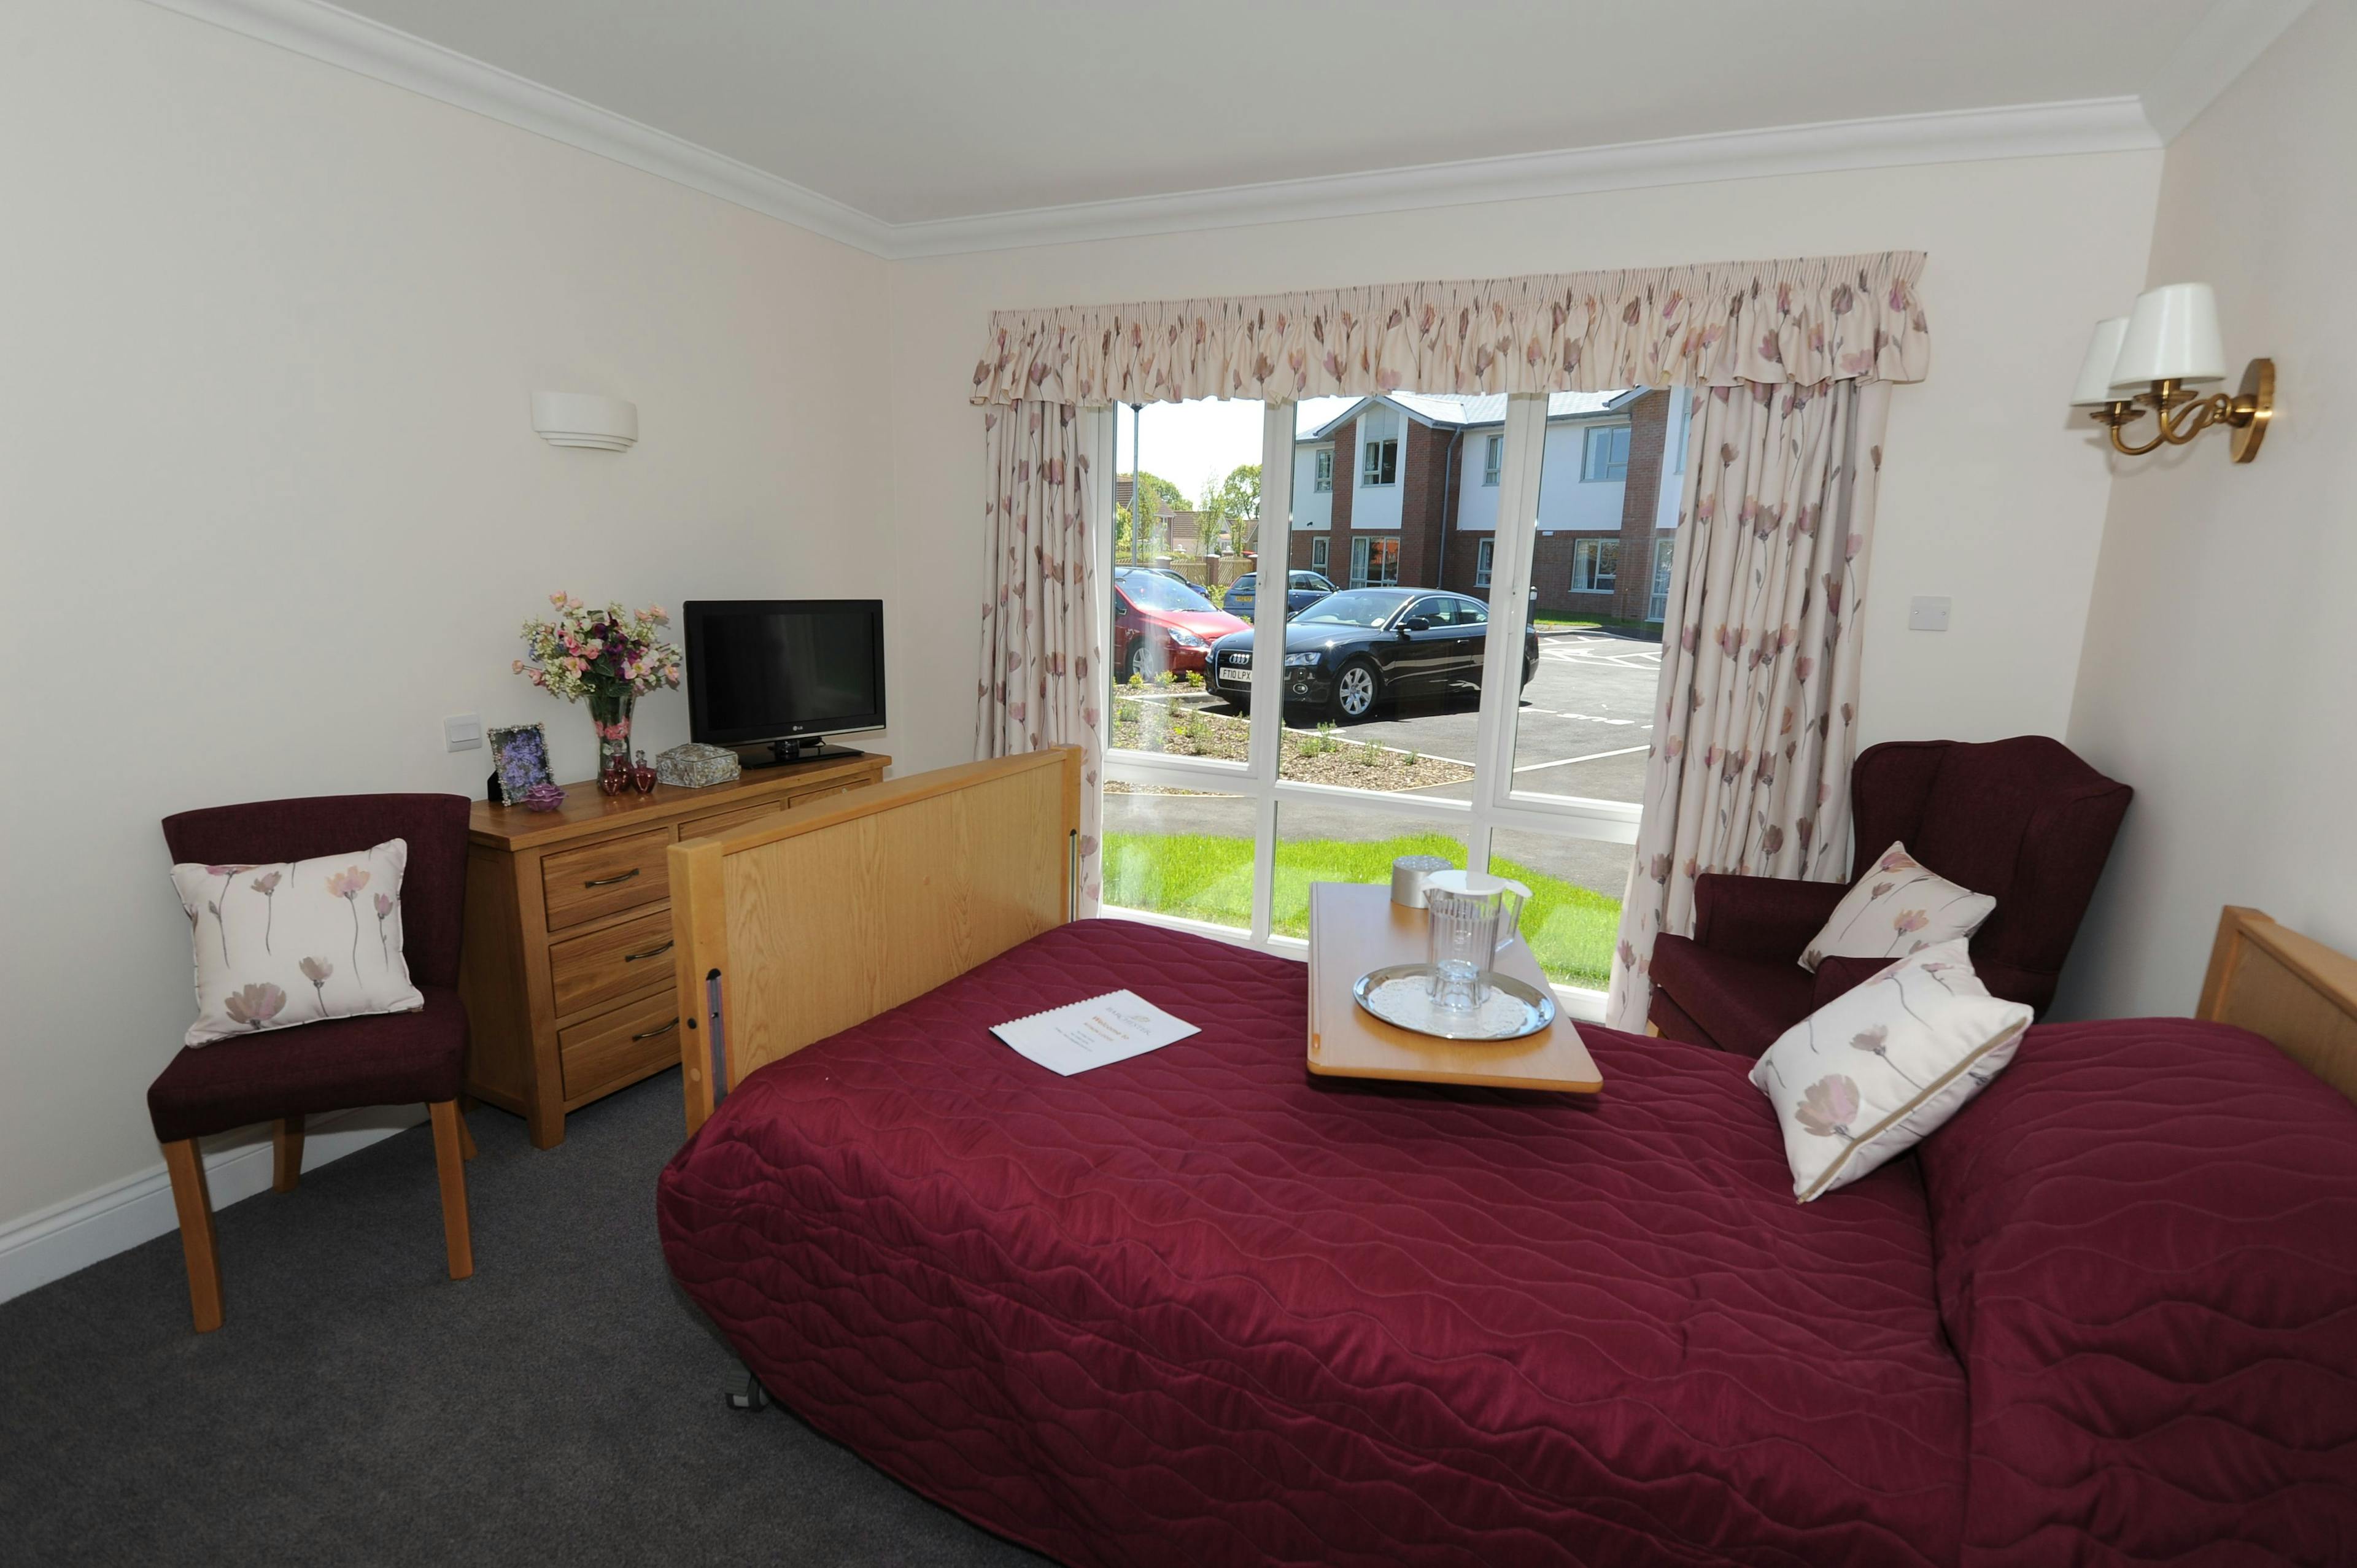 Bedroom at Ritson Lodge Care Home in Gorleston-on-Sea, Great Yarmouth